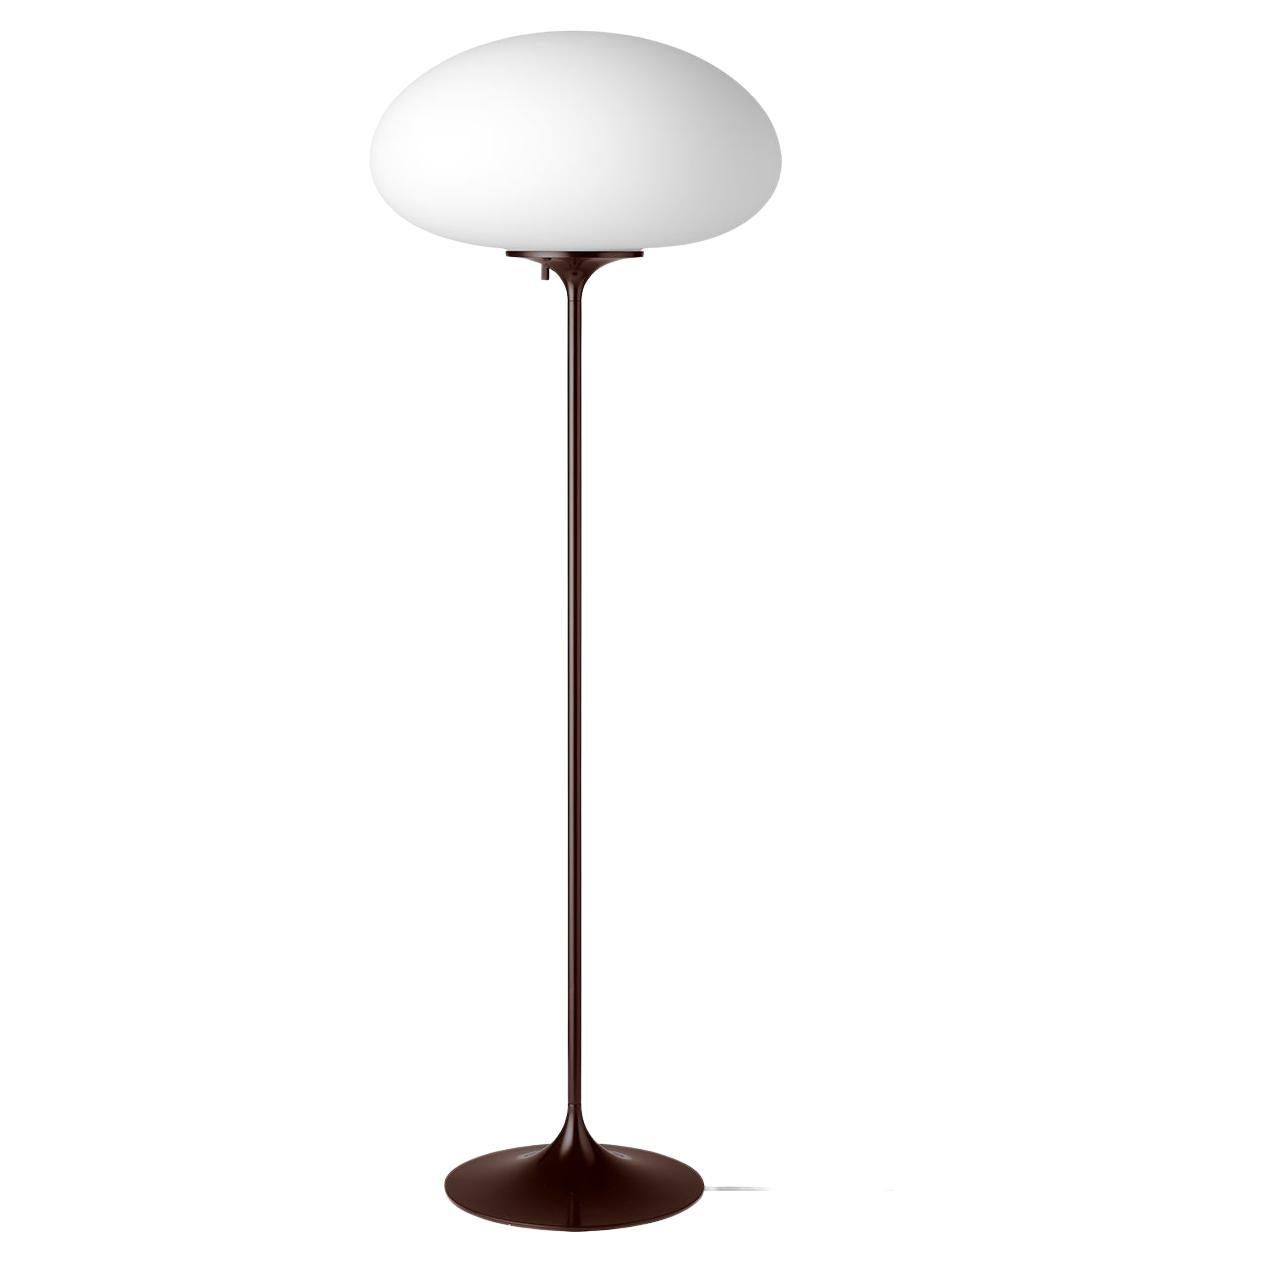 The Stemlite (1962) was the first ‘total look’ lamp, a pioneering new typology conceived by American Designer Bill Curry, which replaced the traditional base-plus-shade form with a single self-contained unit comprising interchangeable modules. His